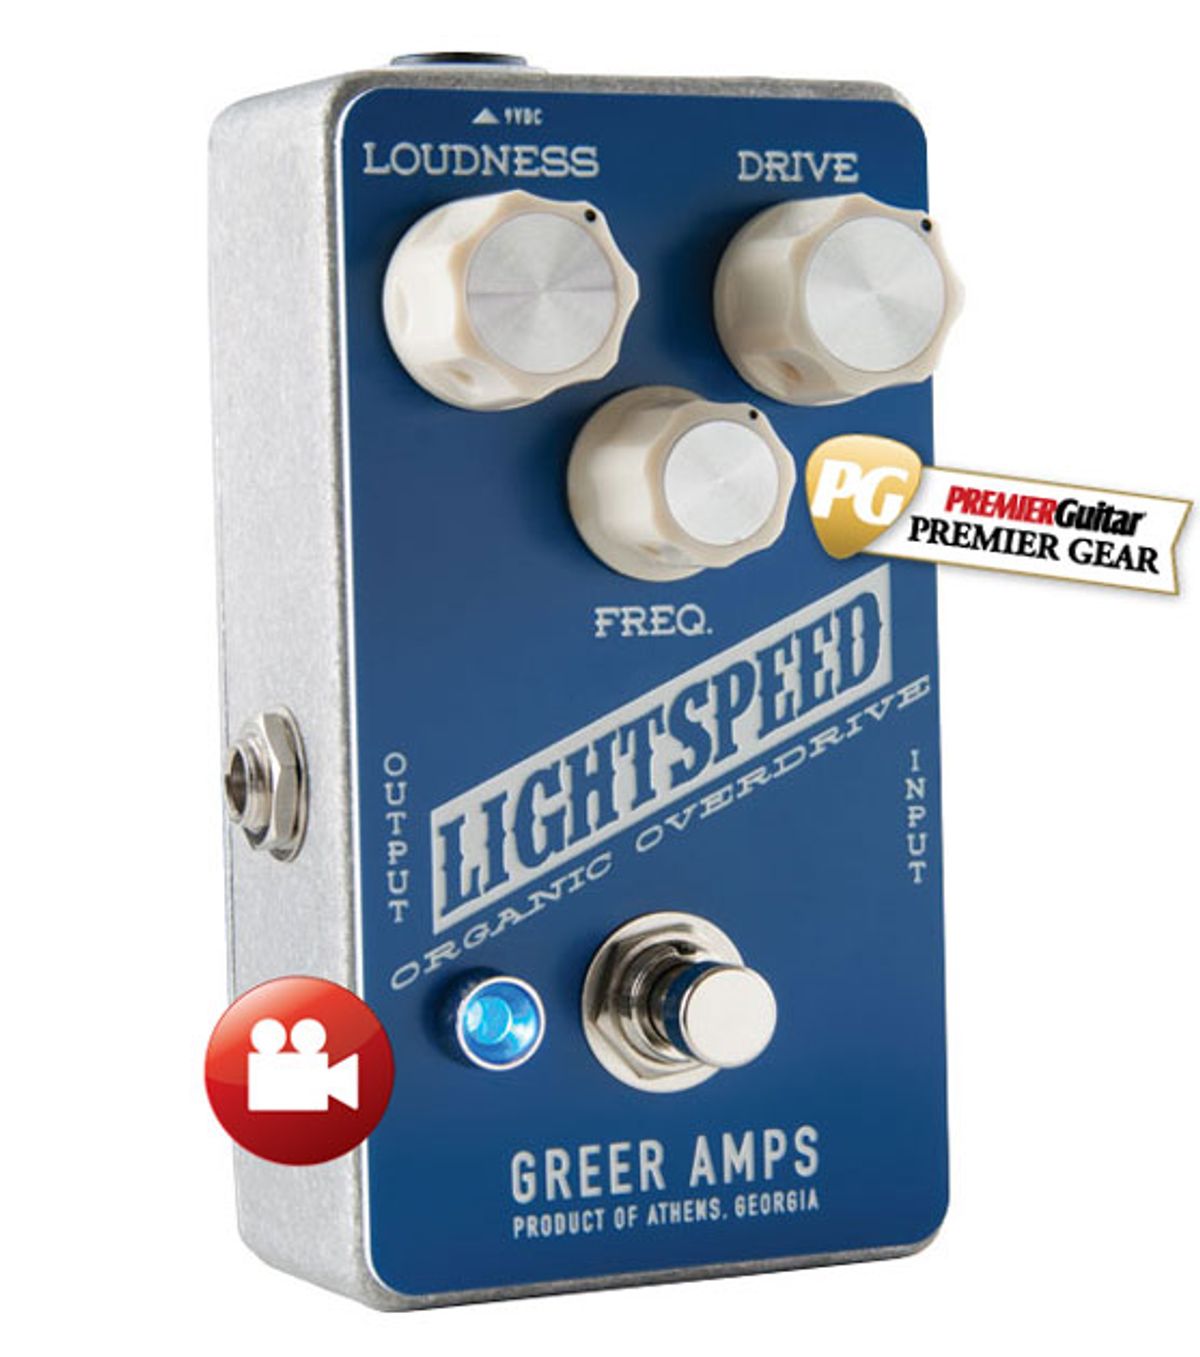 Greer Amps Lightspeed Organic Overdrive Review